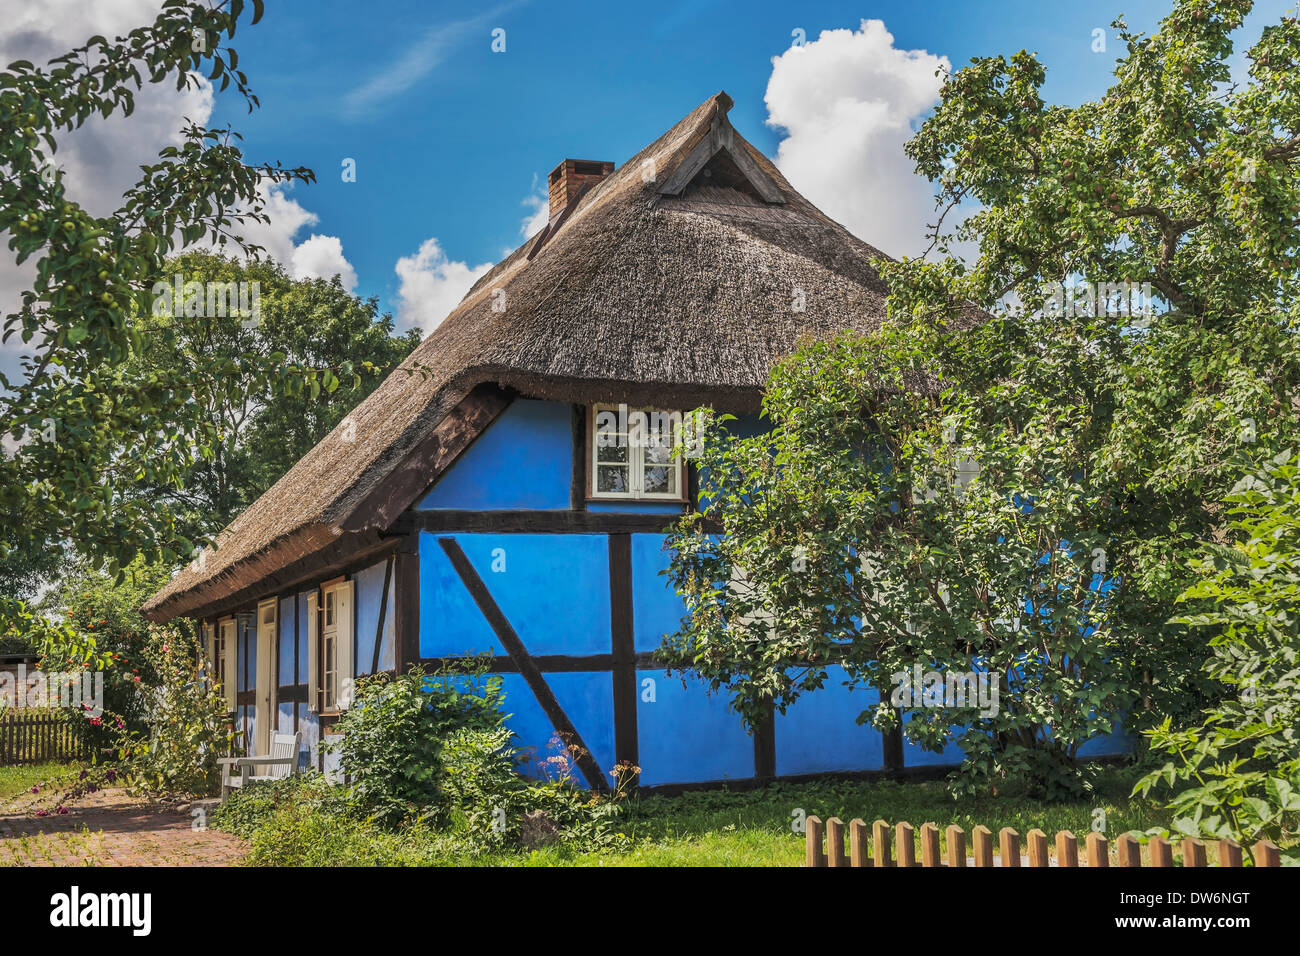 Blue half-timbered house with thatched roof in Warthe, Island of Usedom, Mecklenburg-Western Pomerania, Germany, Europe Stock Photo